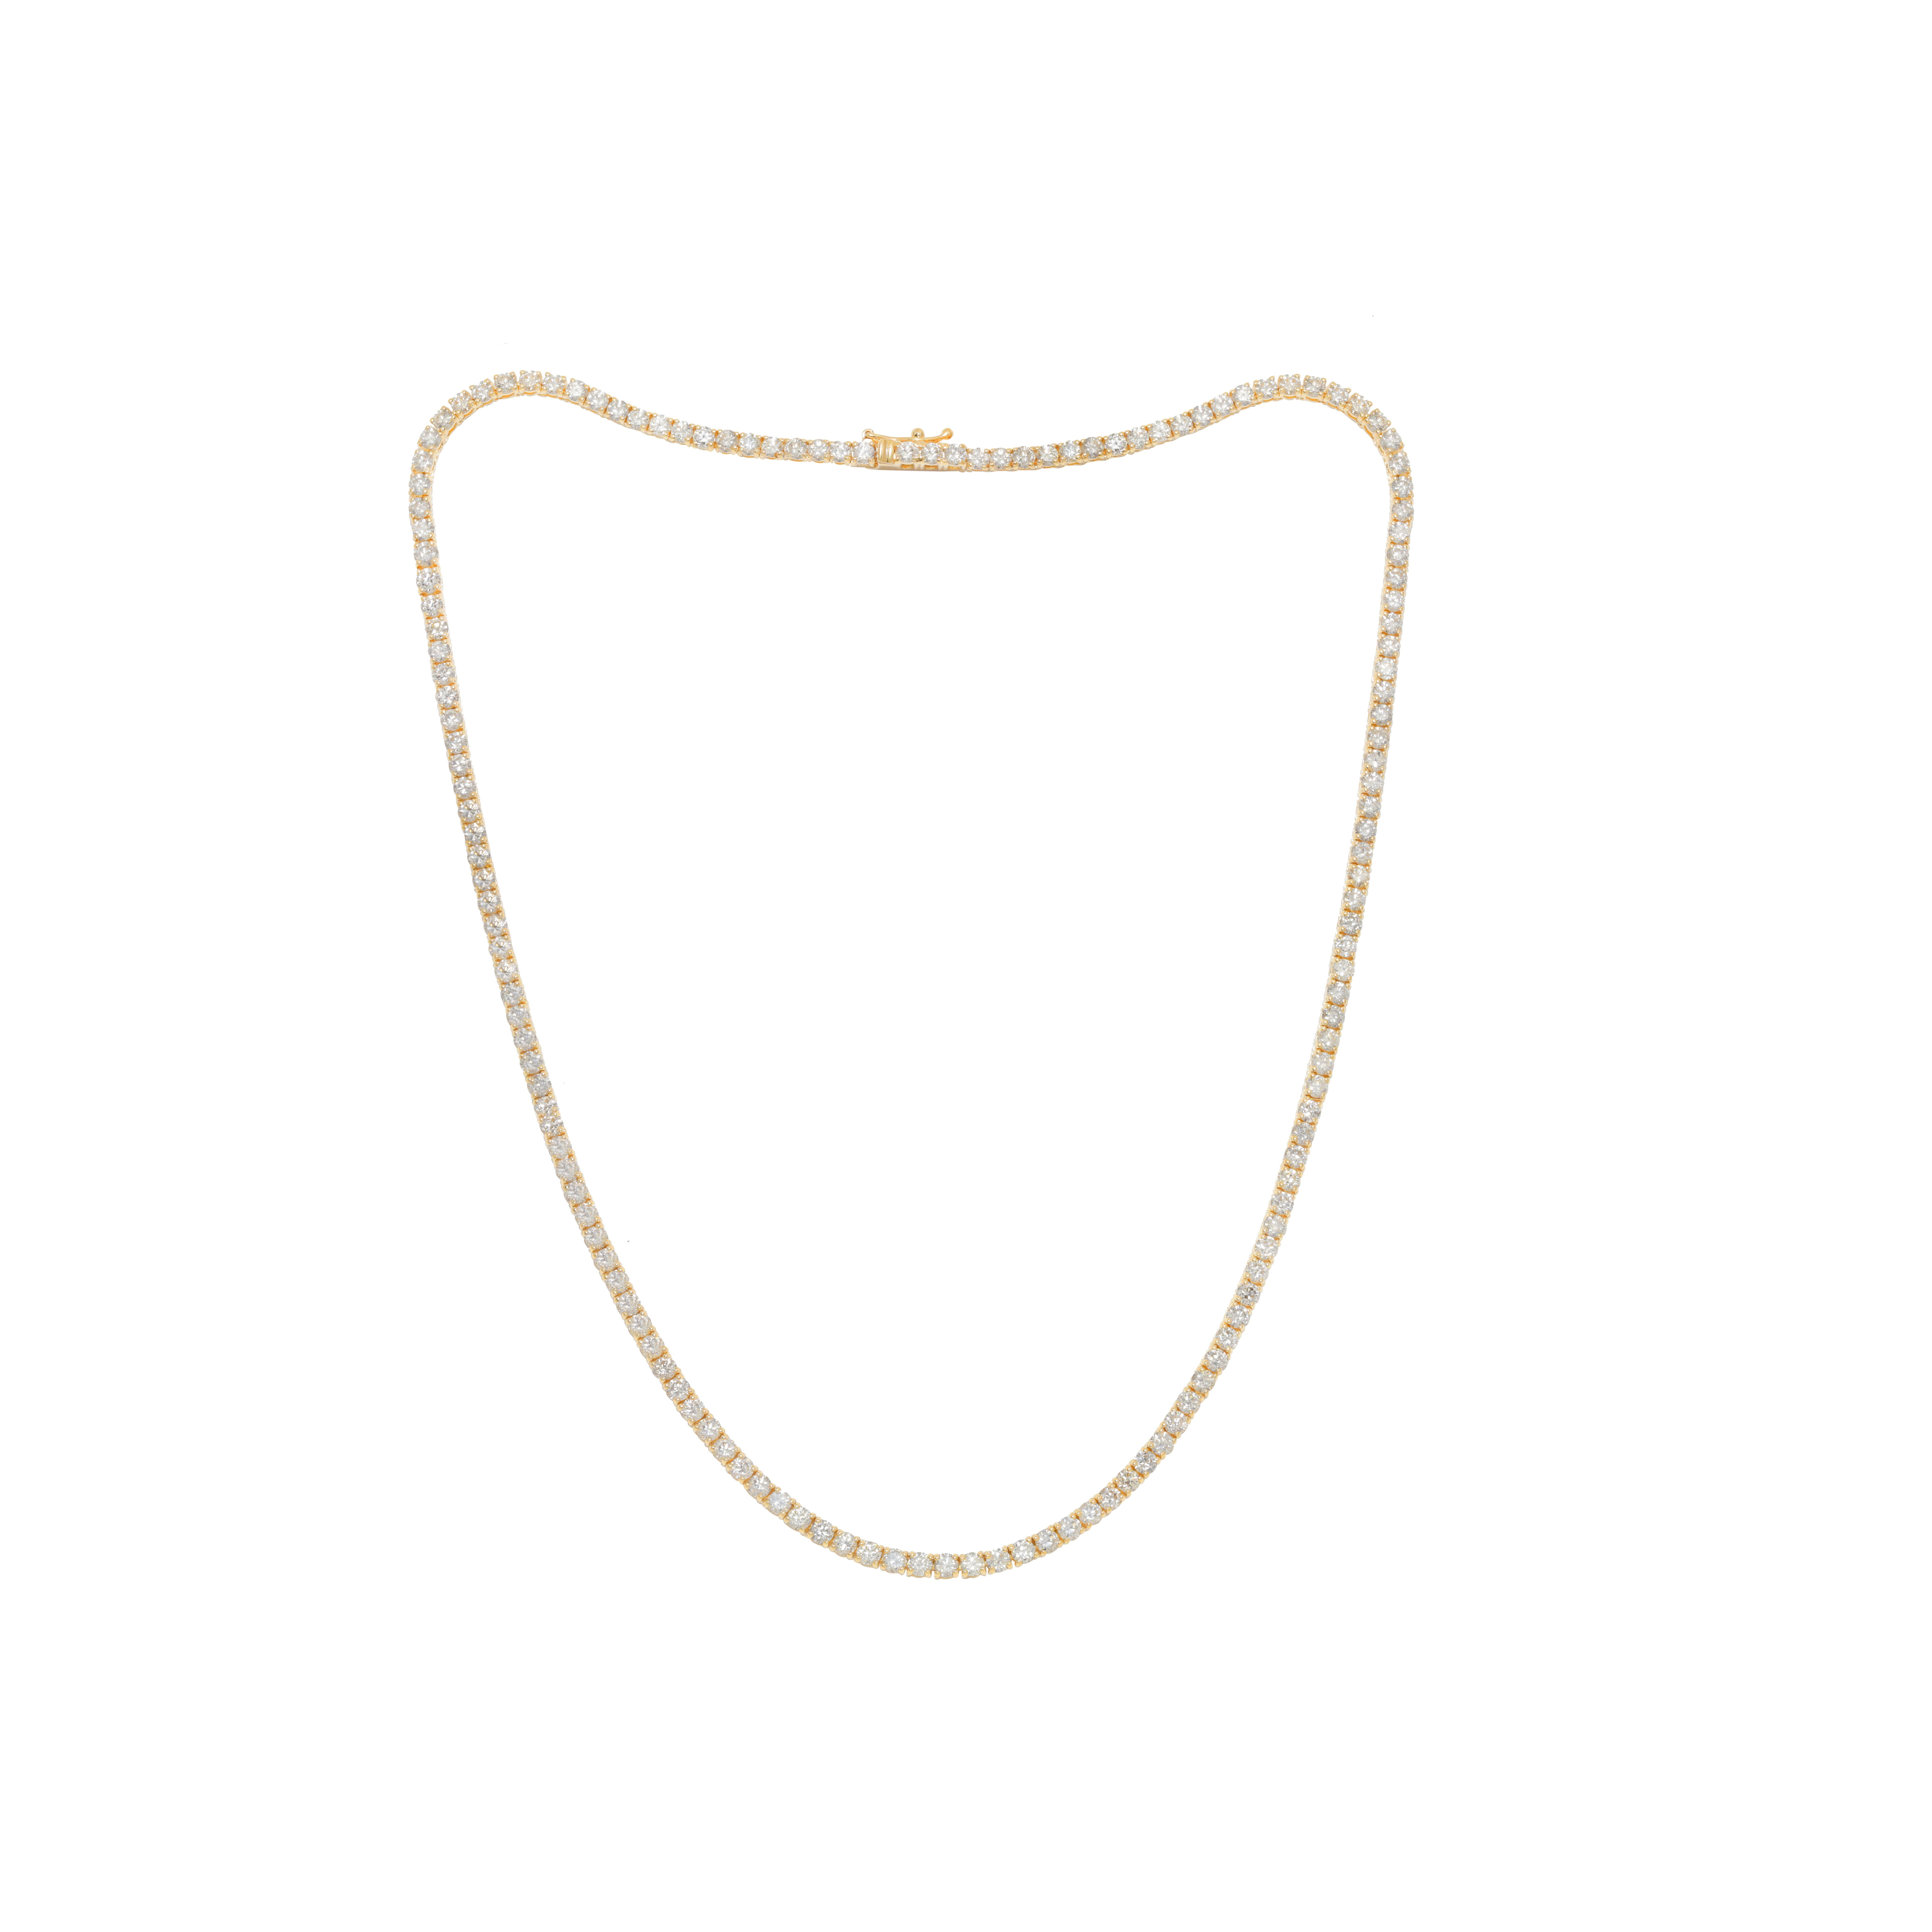 14K Yellow Gold Diamond Straight Line Tennis Necklace Features 8.10Cts of Diamonds. Diana M. is a leading supplier of top-quality fine jewelry for over 35 years.
Diana M is one-stop shop for all your jewelry shopping, carrying line of diamond rings,